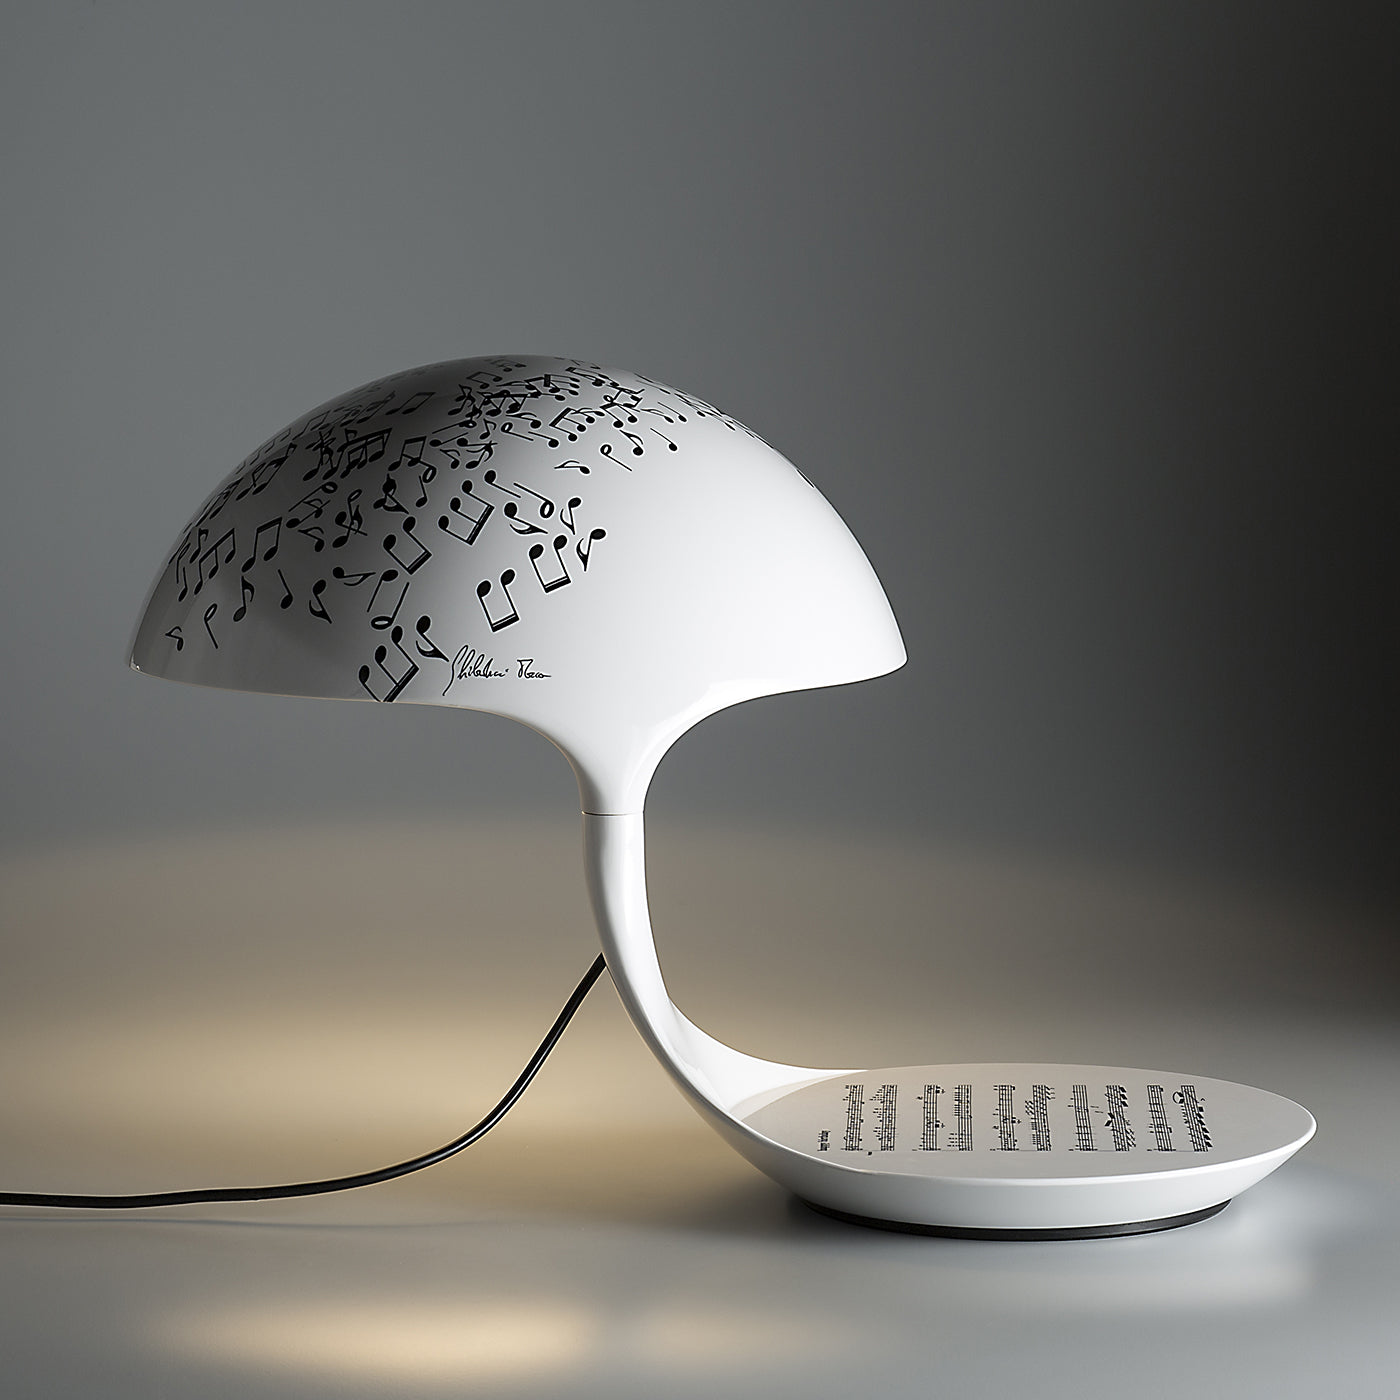 Cobra Texture Music Notes Table Lamp by Marco Ghilarducci - Alternative view 2